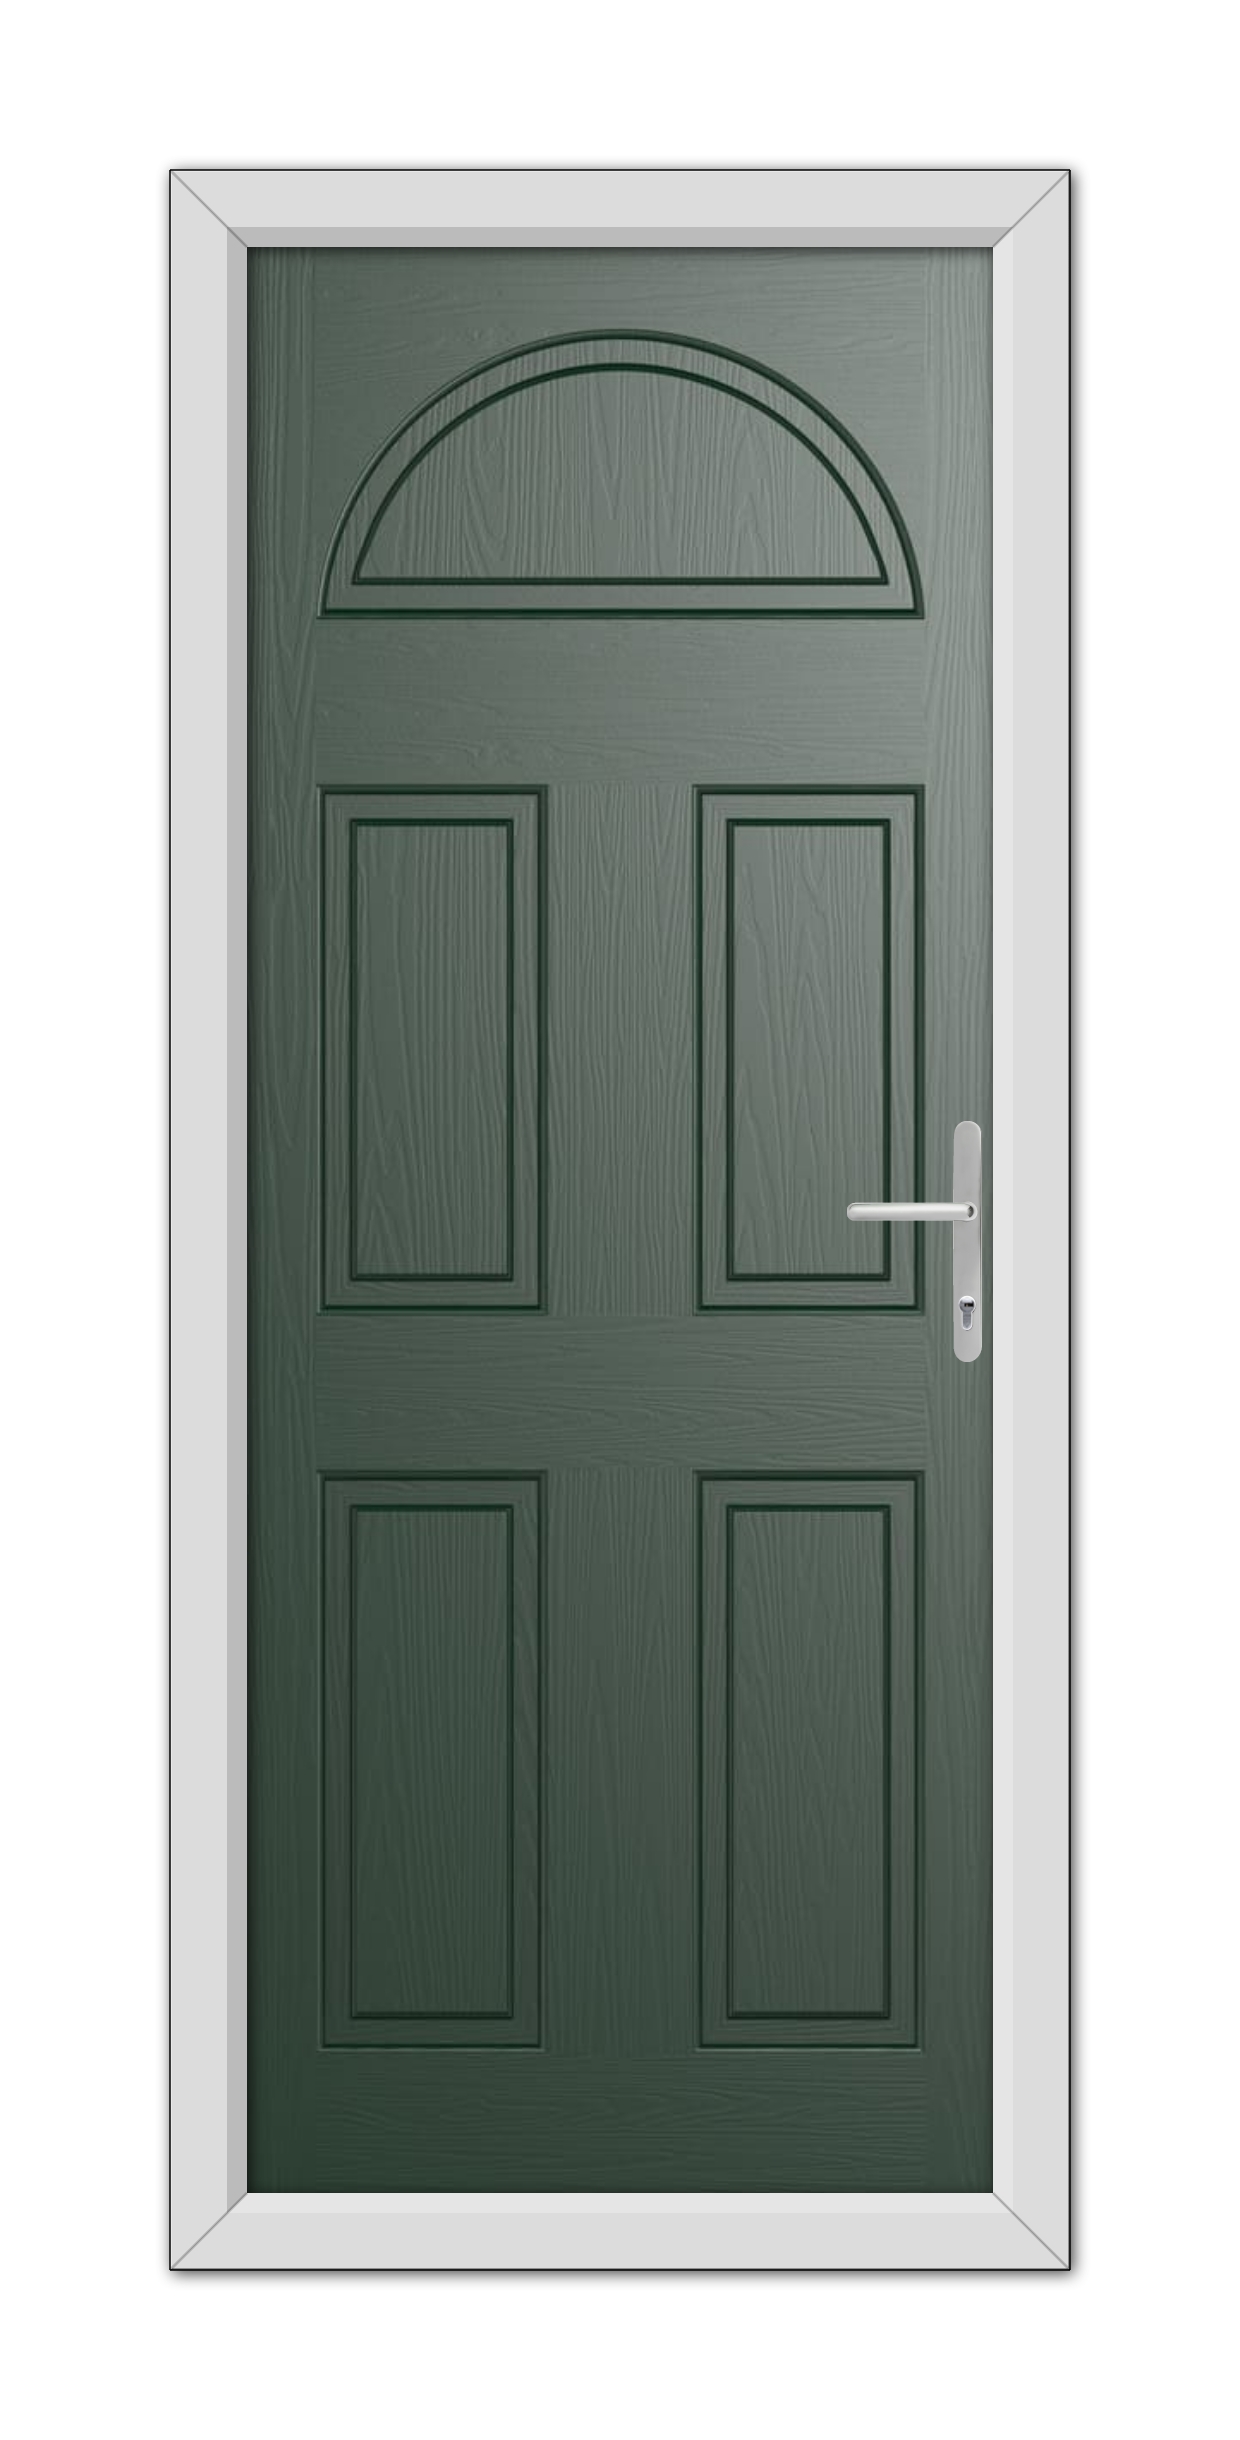 A Green Winslow Solid Composite Door 48mm Timber Core with a semi-circular transom window and a modern handle, set within a white frame.